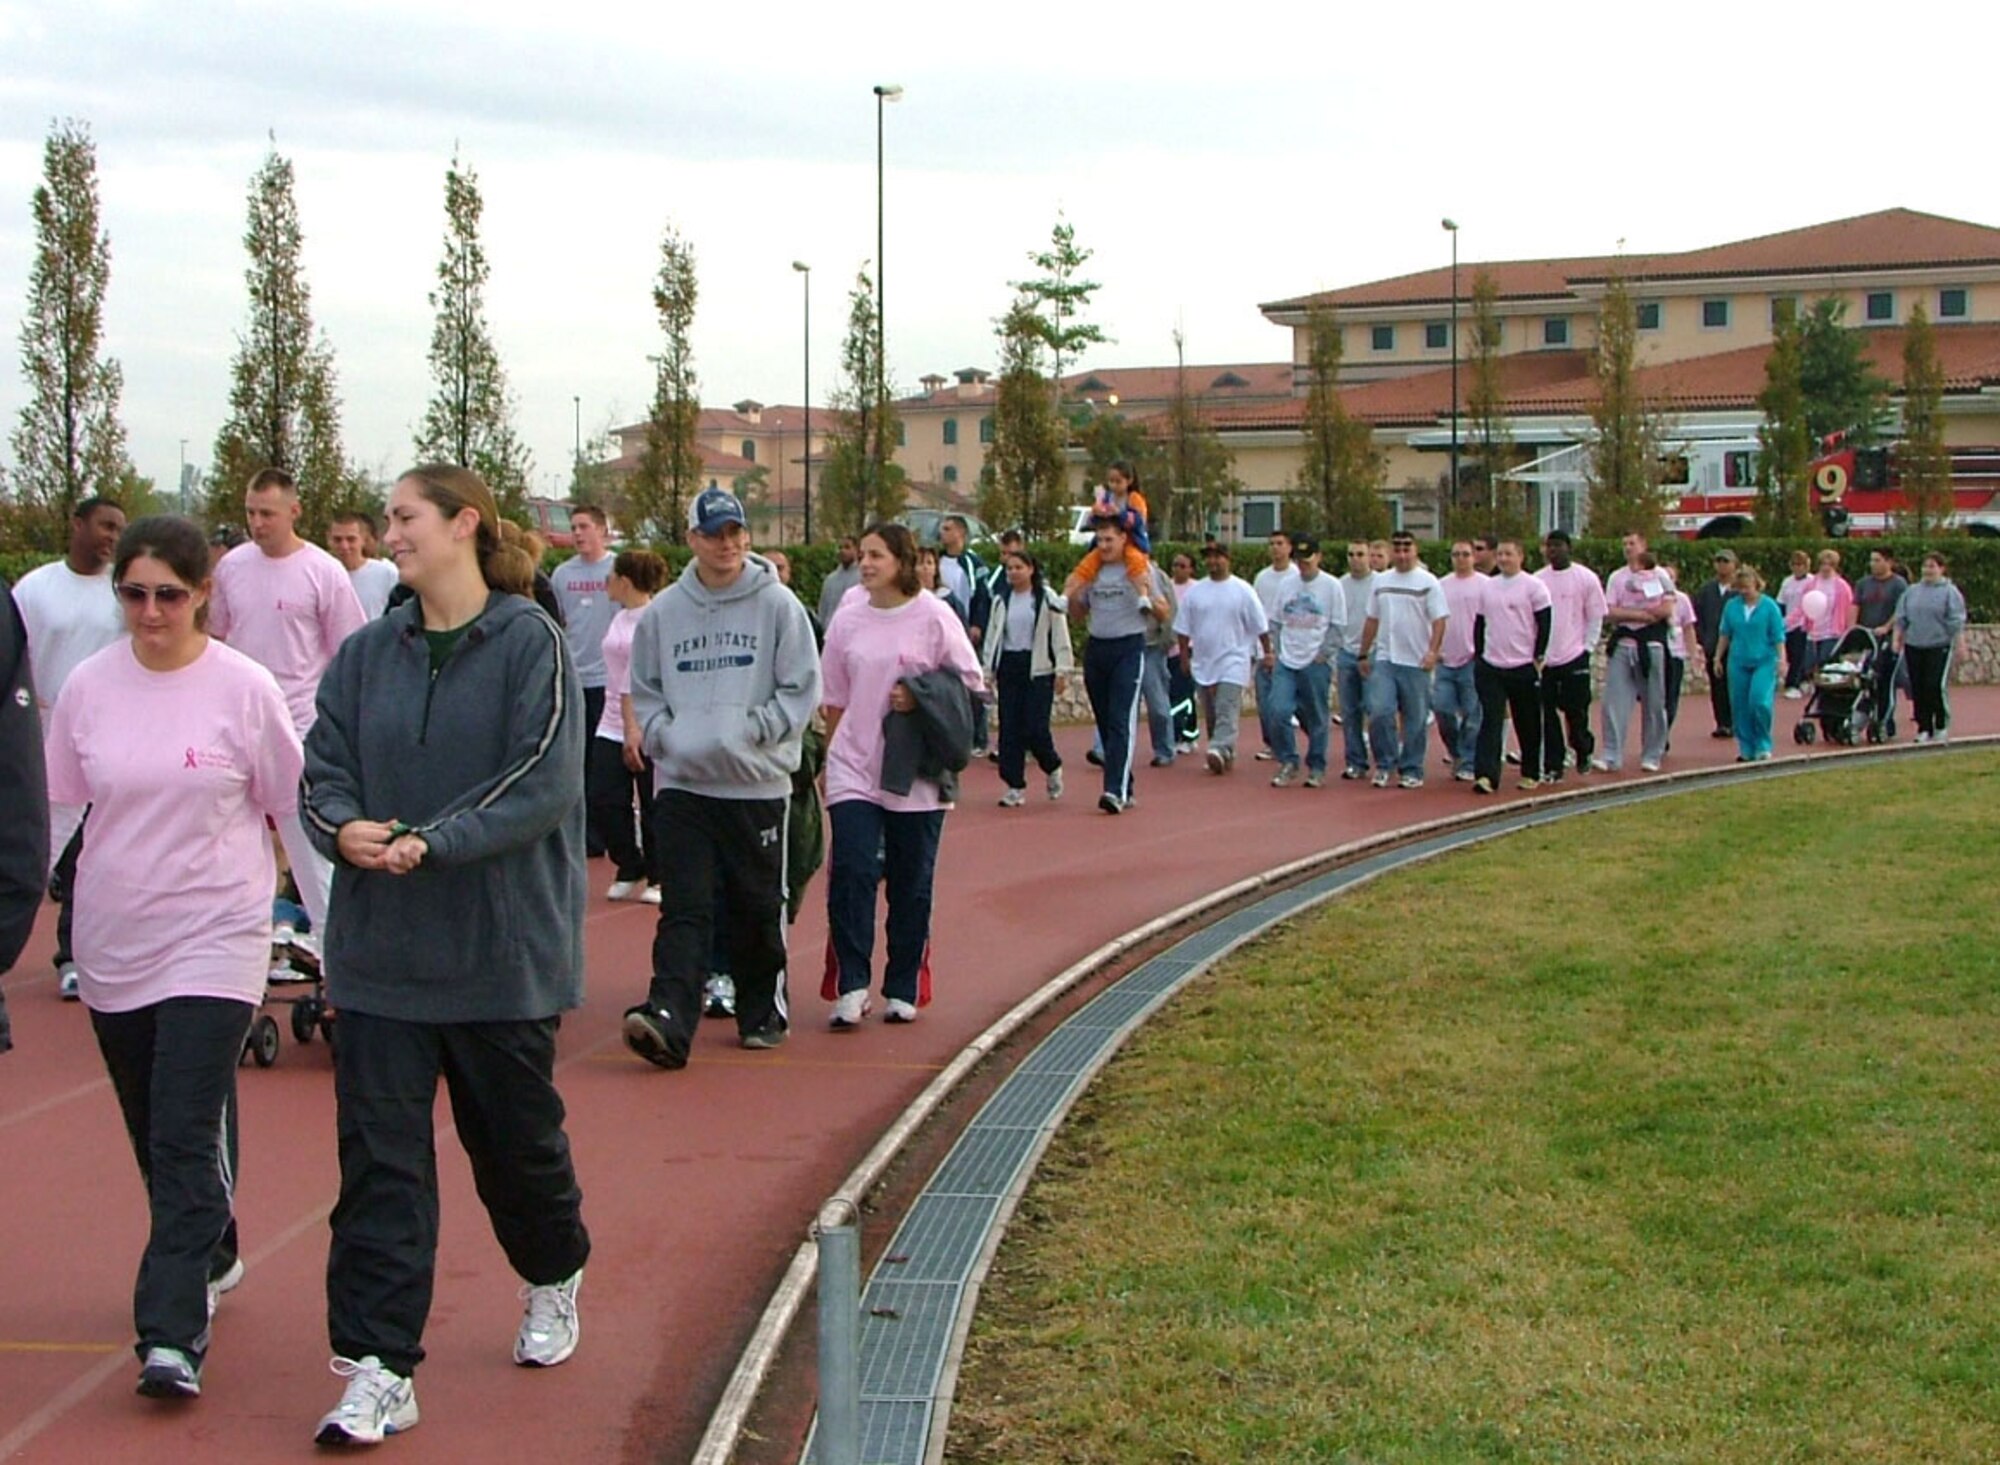 More than 200 Airmen and family members at Aviano Air Base, Italy, put their best foot forward to help raise awareness of and donations for breast cancer issues during an Aviano Community Enlisted Spouses Club-sponsored walk Oct. 21. (U.S. Air Force photo/Senior Airman Colleen Wieman)
